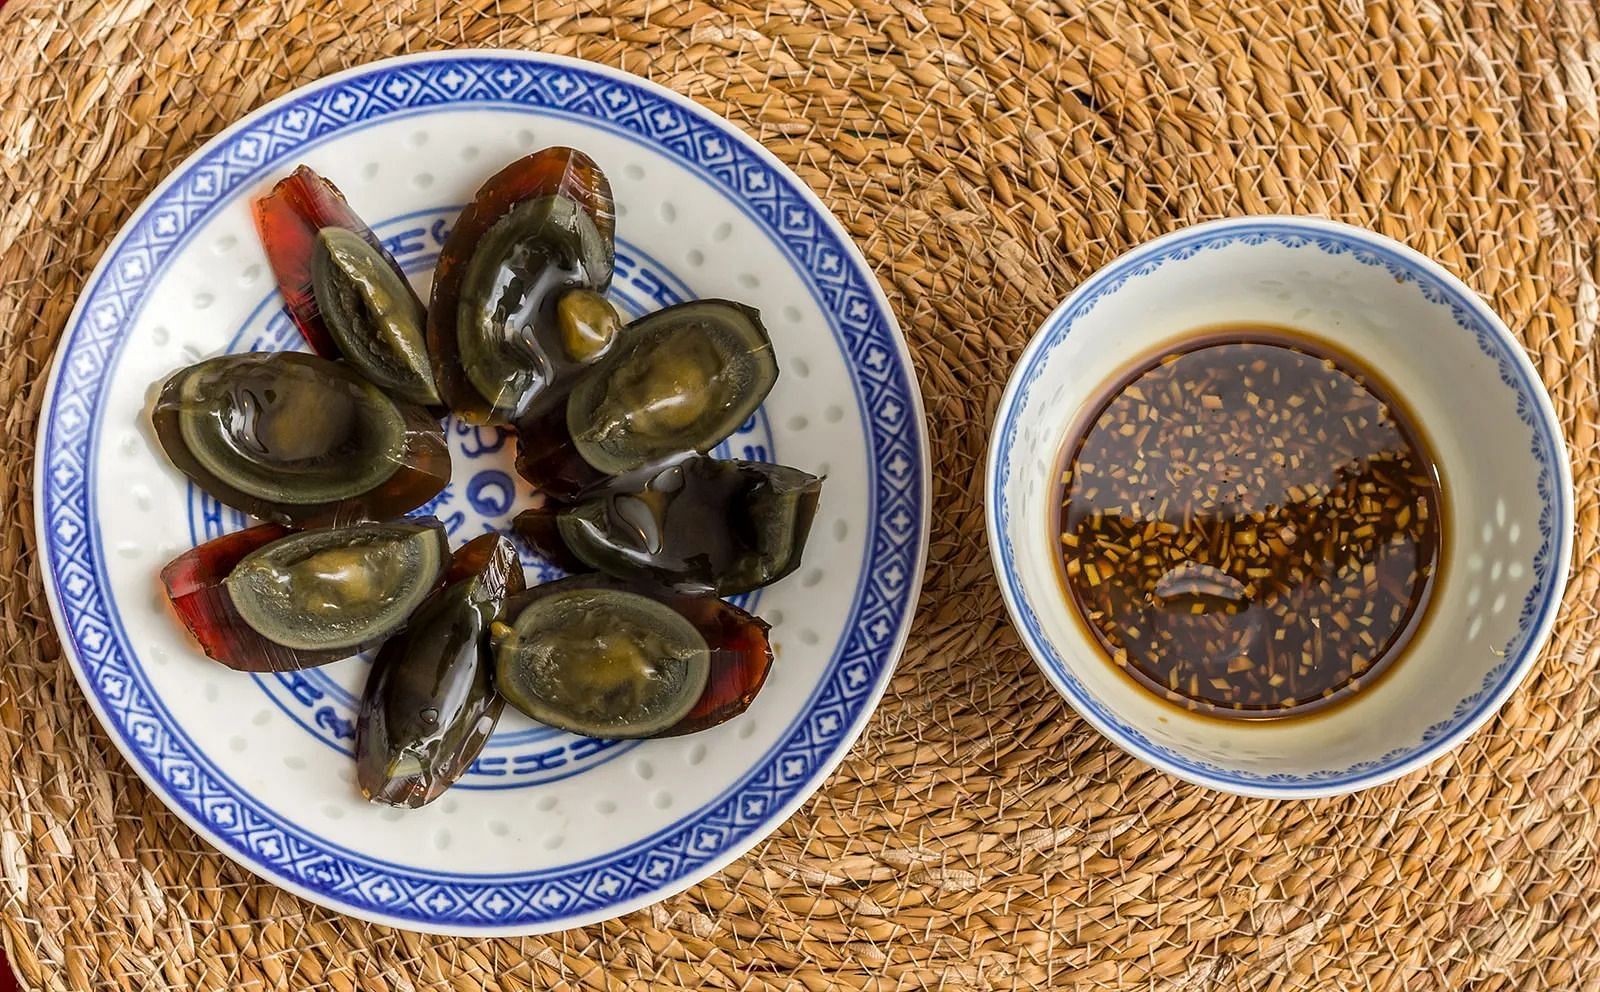 Century egg as a disgusting food (Image via Getty Images)